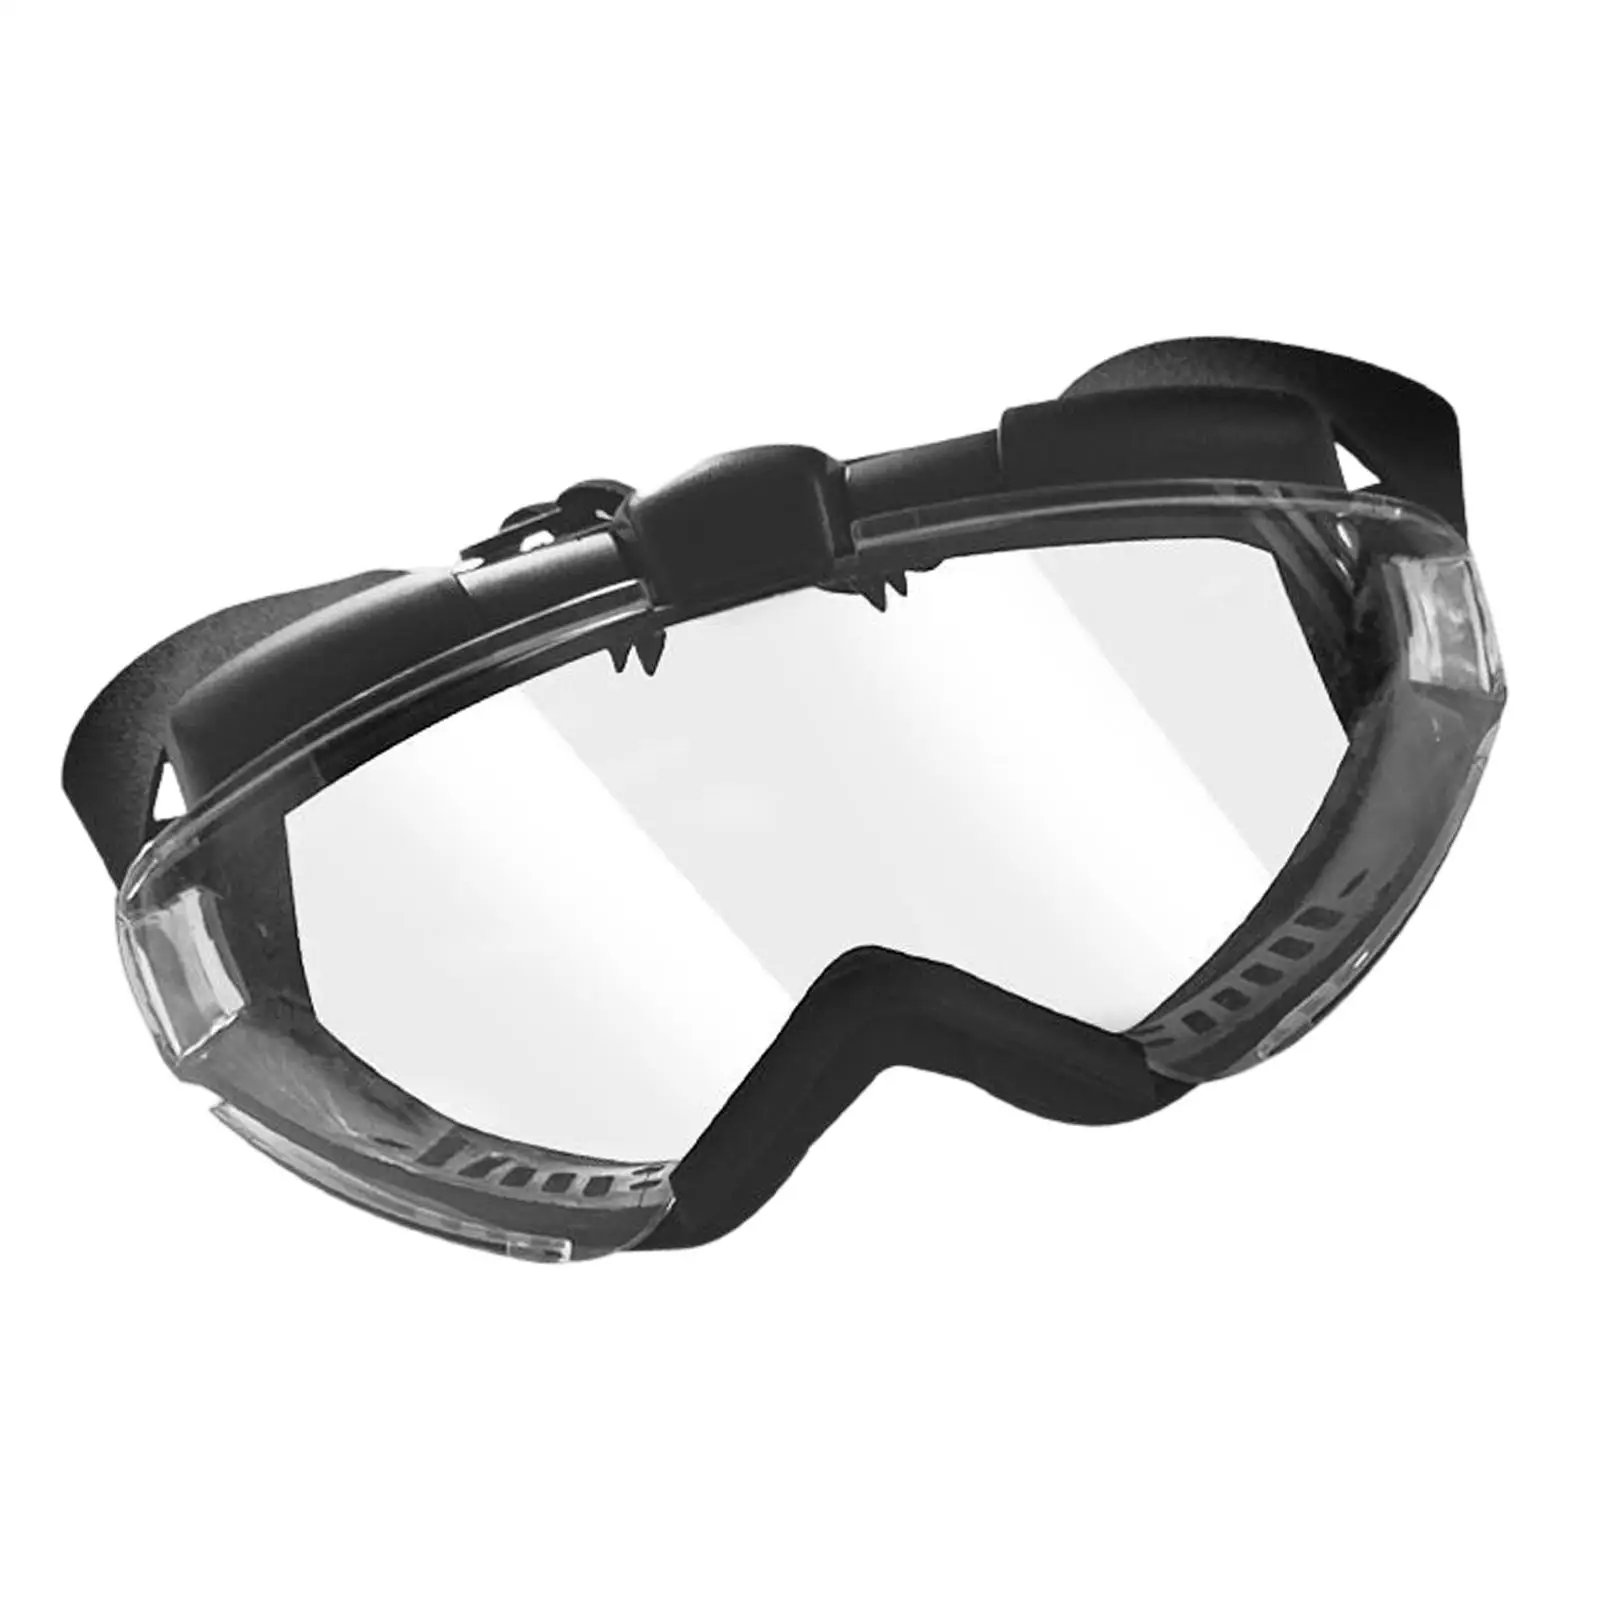 Outdoor Glasses Goggles with Adjustable Strap for Motorcycle Ski Riding Running